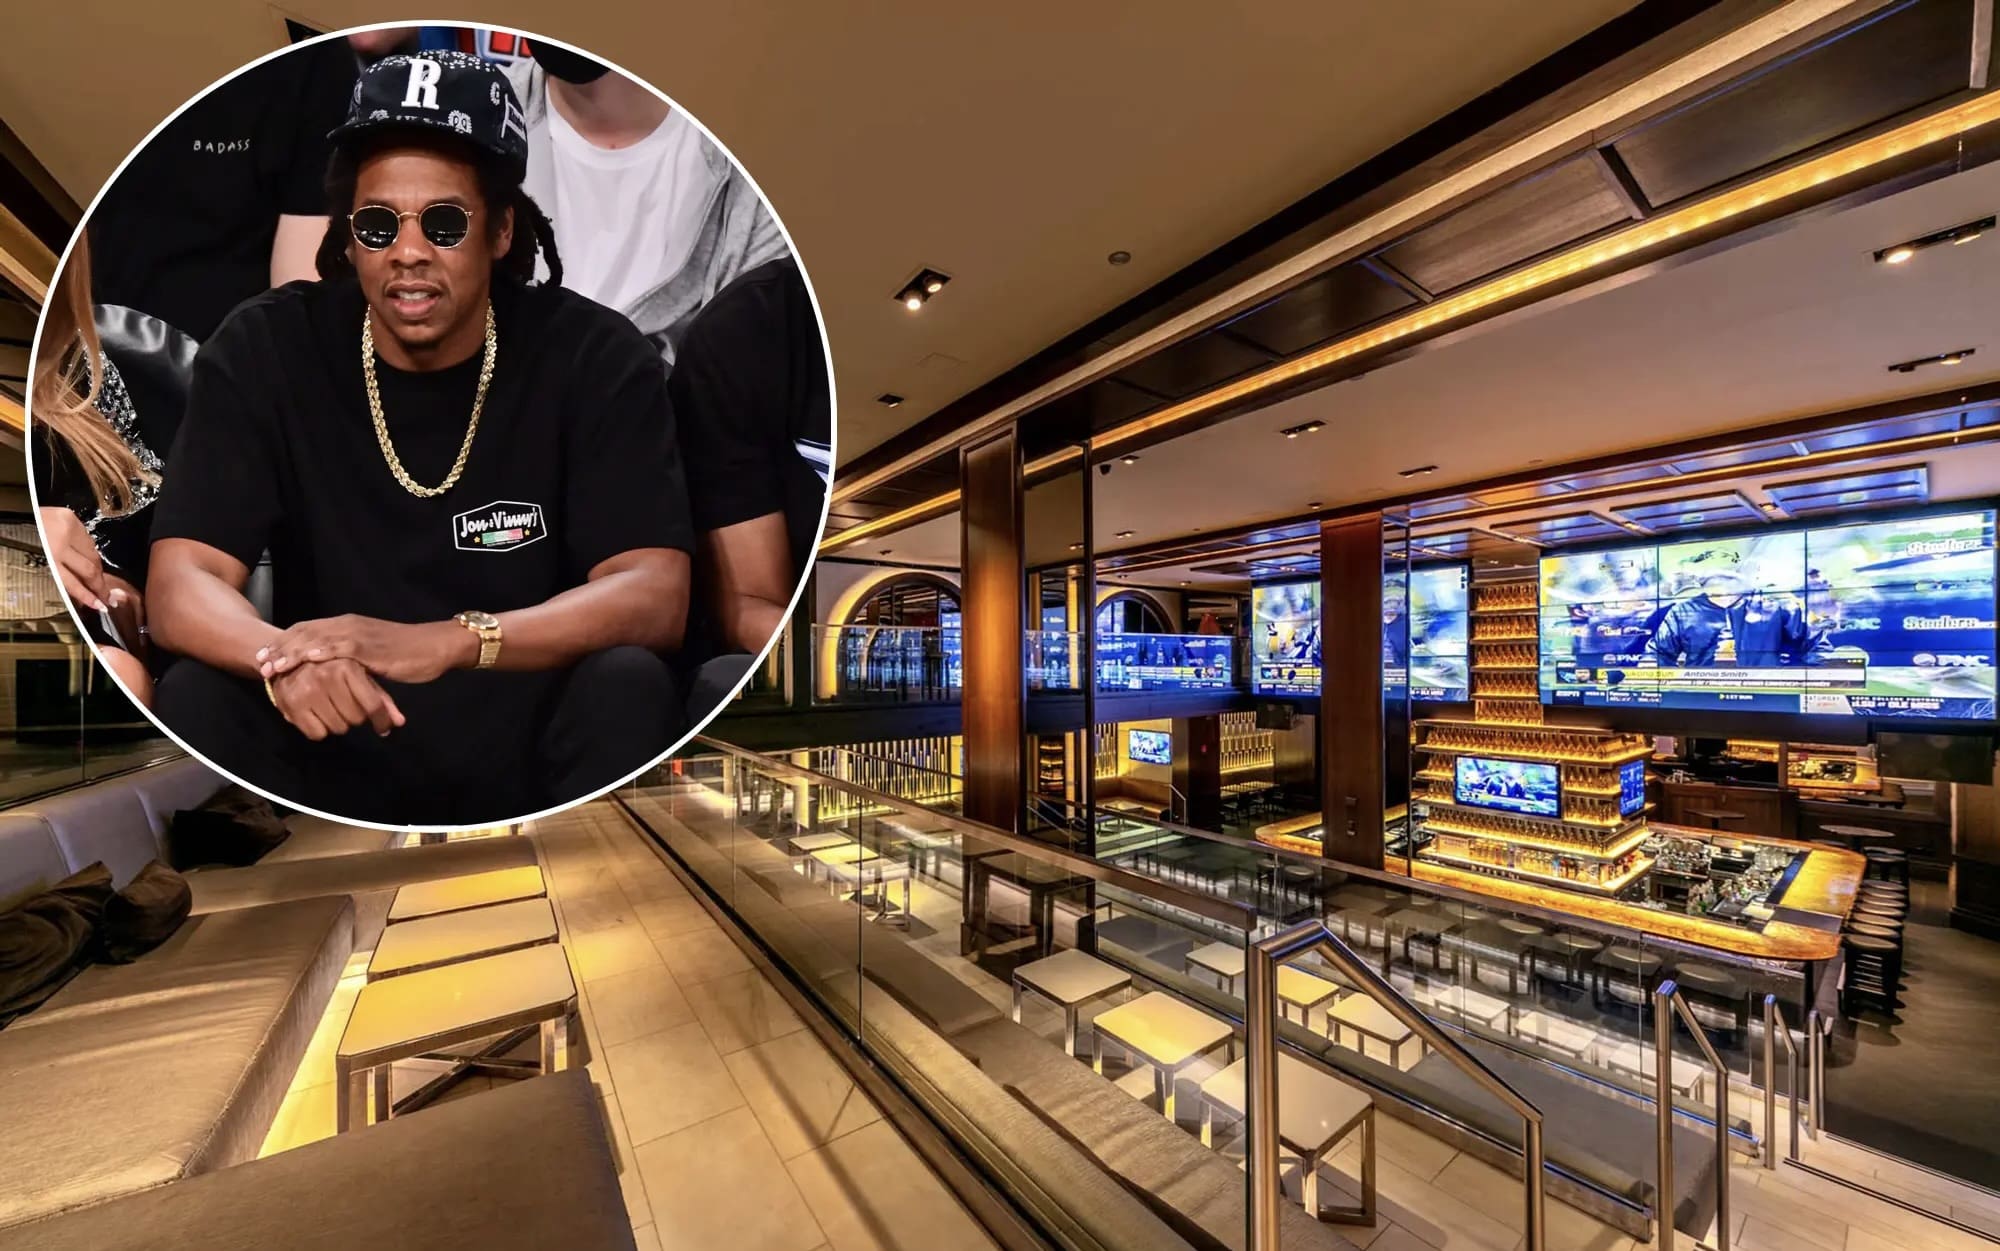 Jay-Z’s Esteemed Nightclub, The 40/40 Club, Has Reportedly Shut Down Its Flagship Location After 20 Years